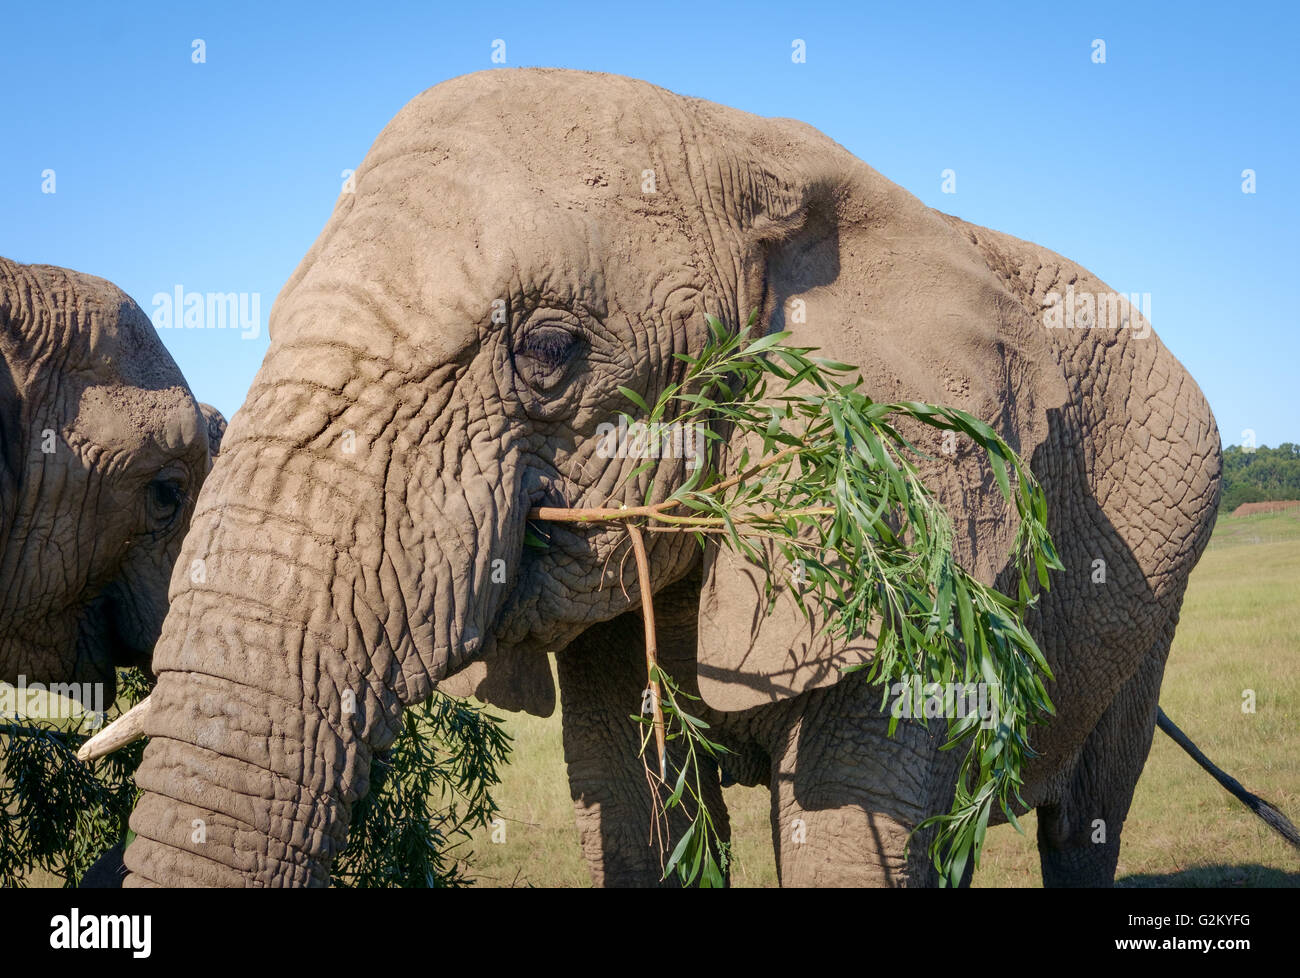 African elephant eating branches in Knysna, South Africa Stock Photo